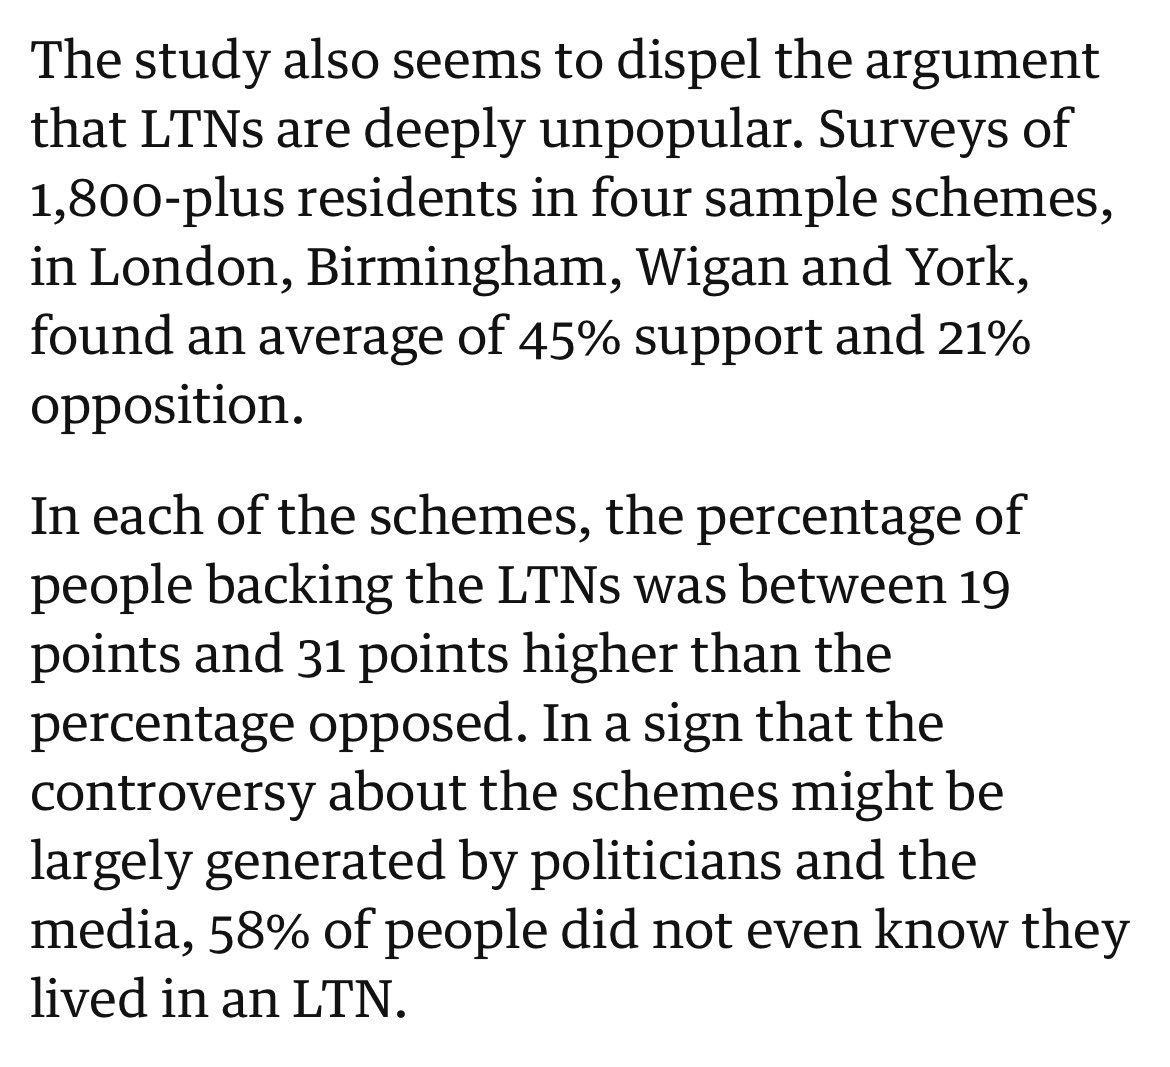 First upzoning, now low-traffic neighbourhoods: We’re now consistently seeing evidence that many policies which are supposedly unpopular (because the system is designed so we only hear from the objectors) turn out to be popular when you do proper representative surveys.